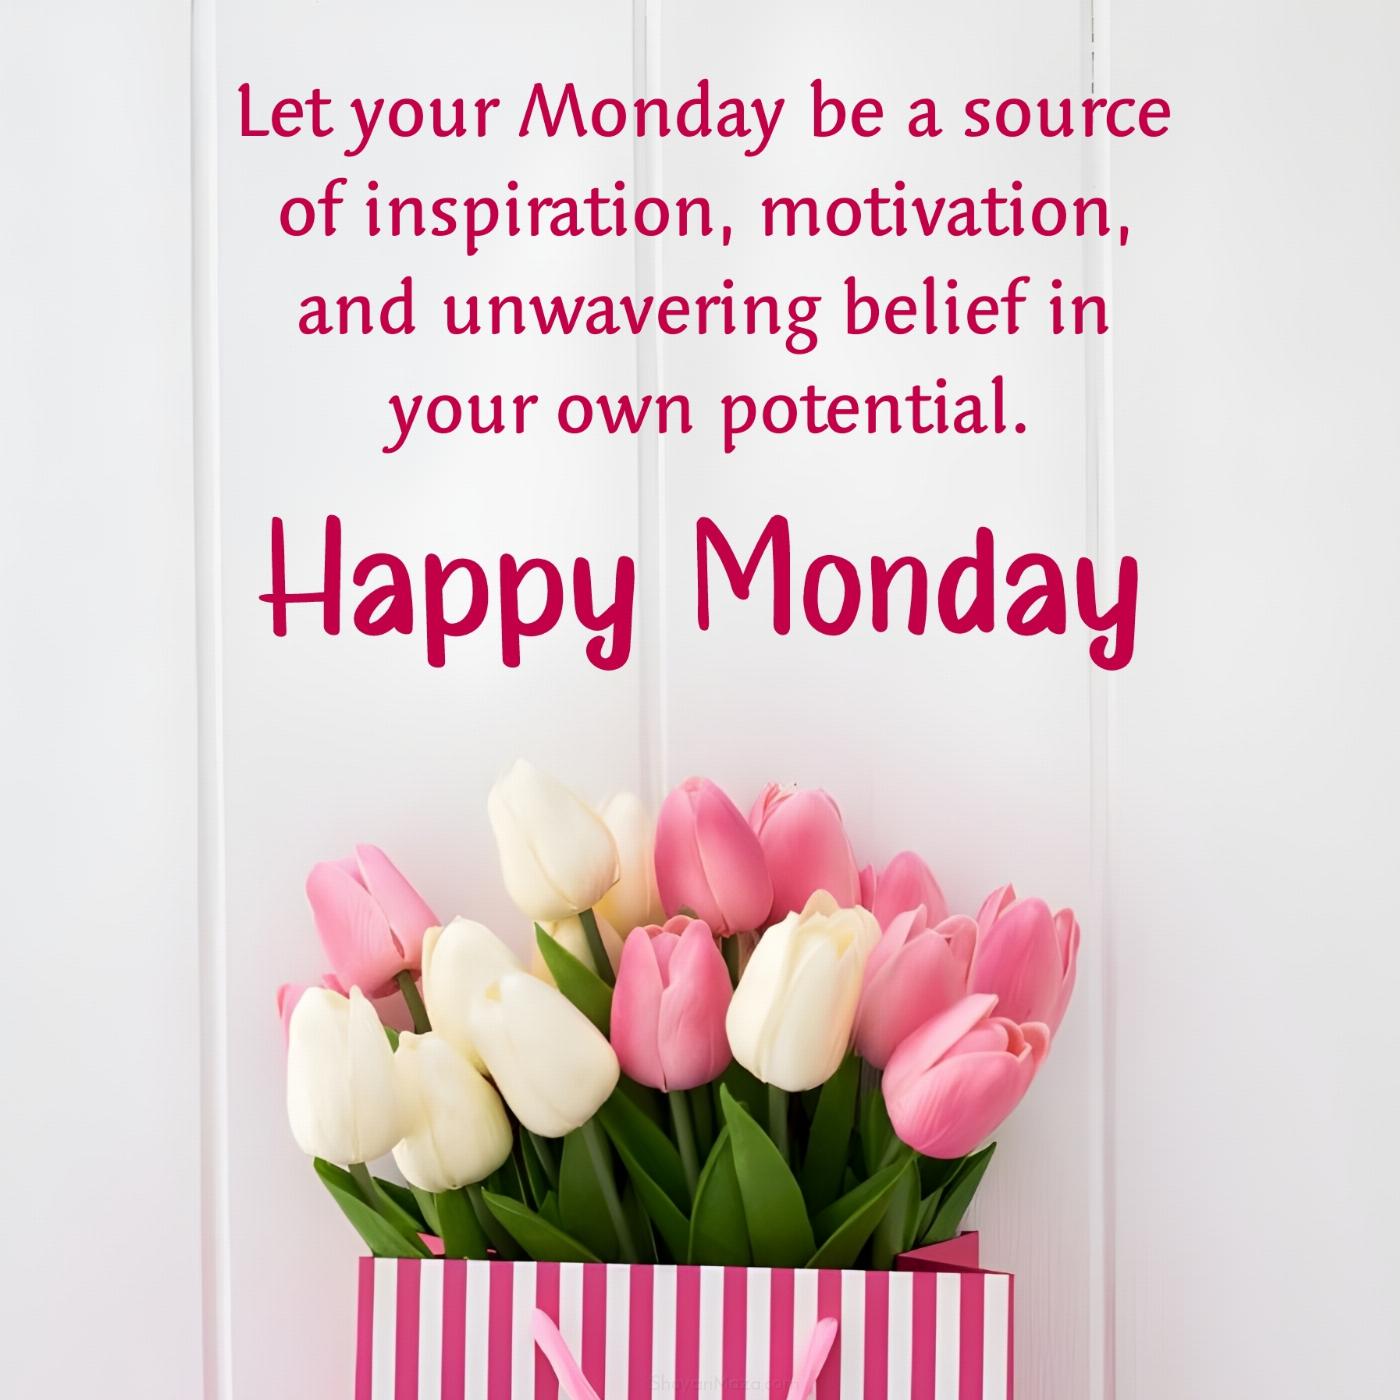 Let your Monday be a source of inspiration